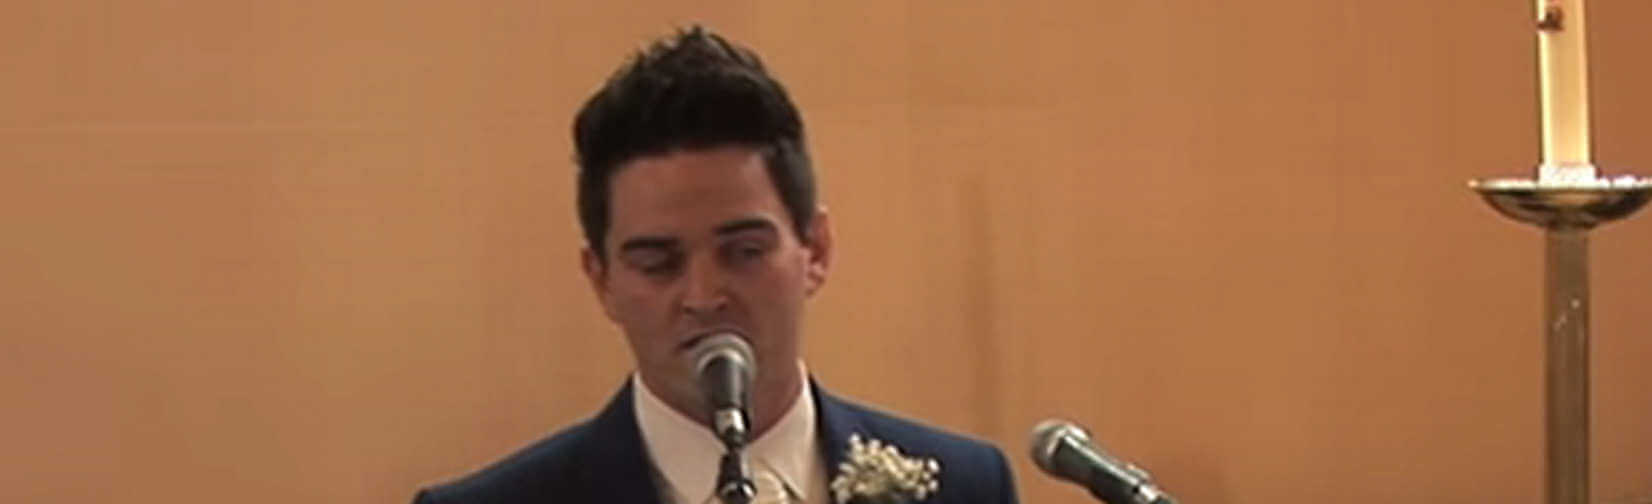 Dean Conaghan broke into song as his beautiful bride sat and watched him in awe